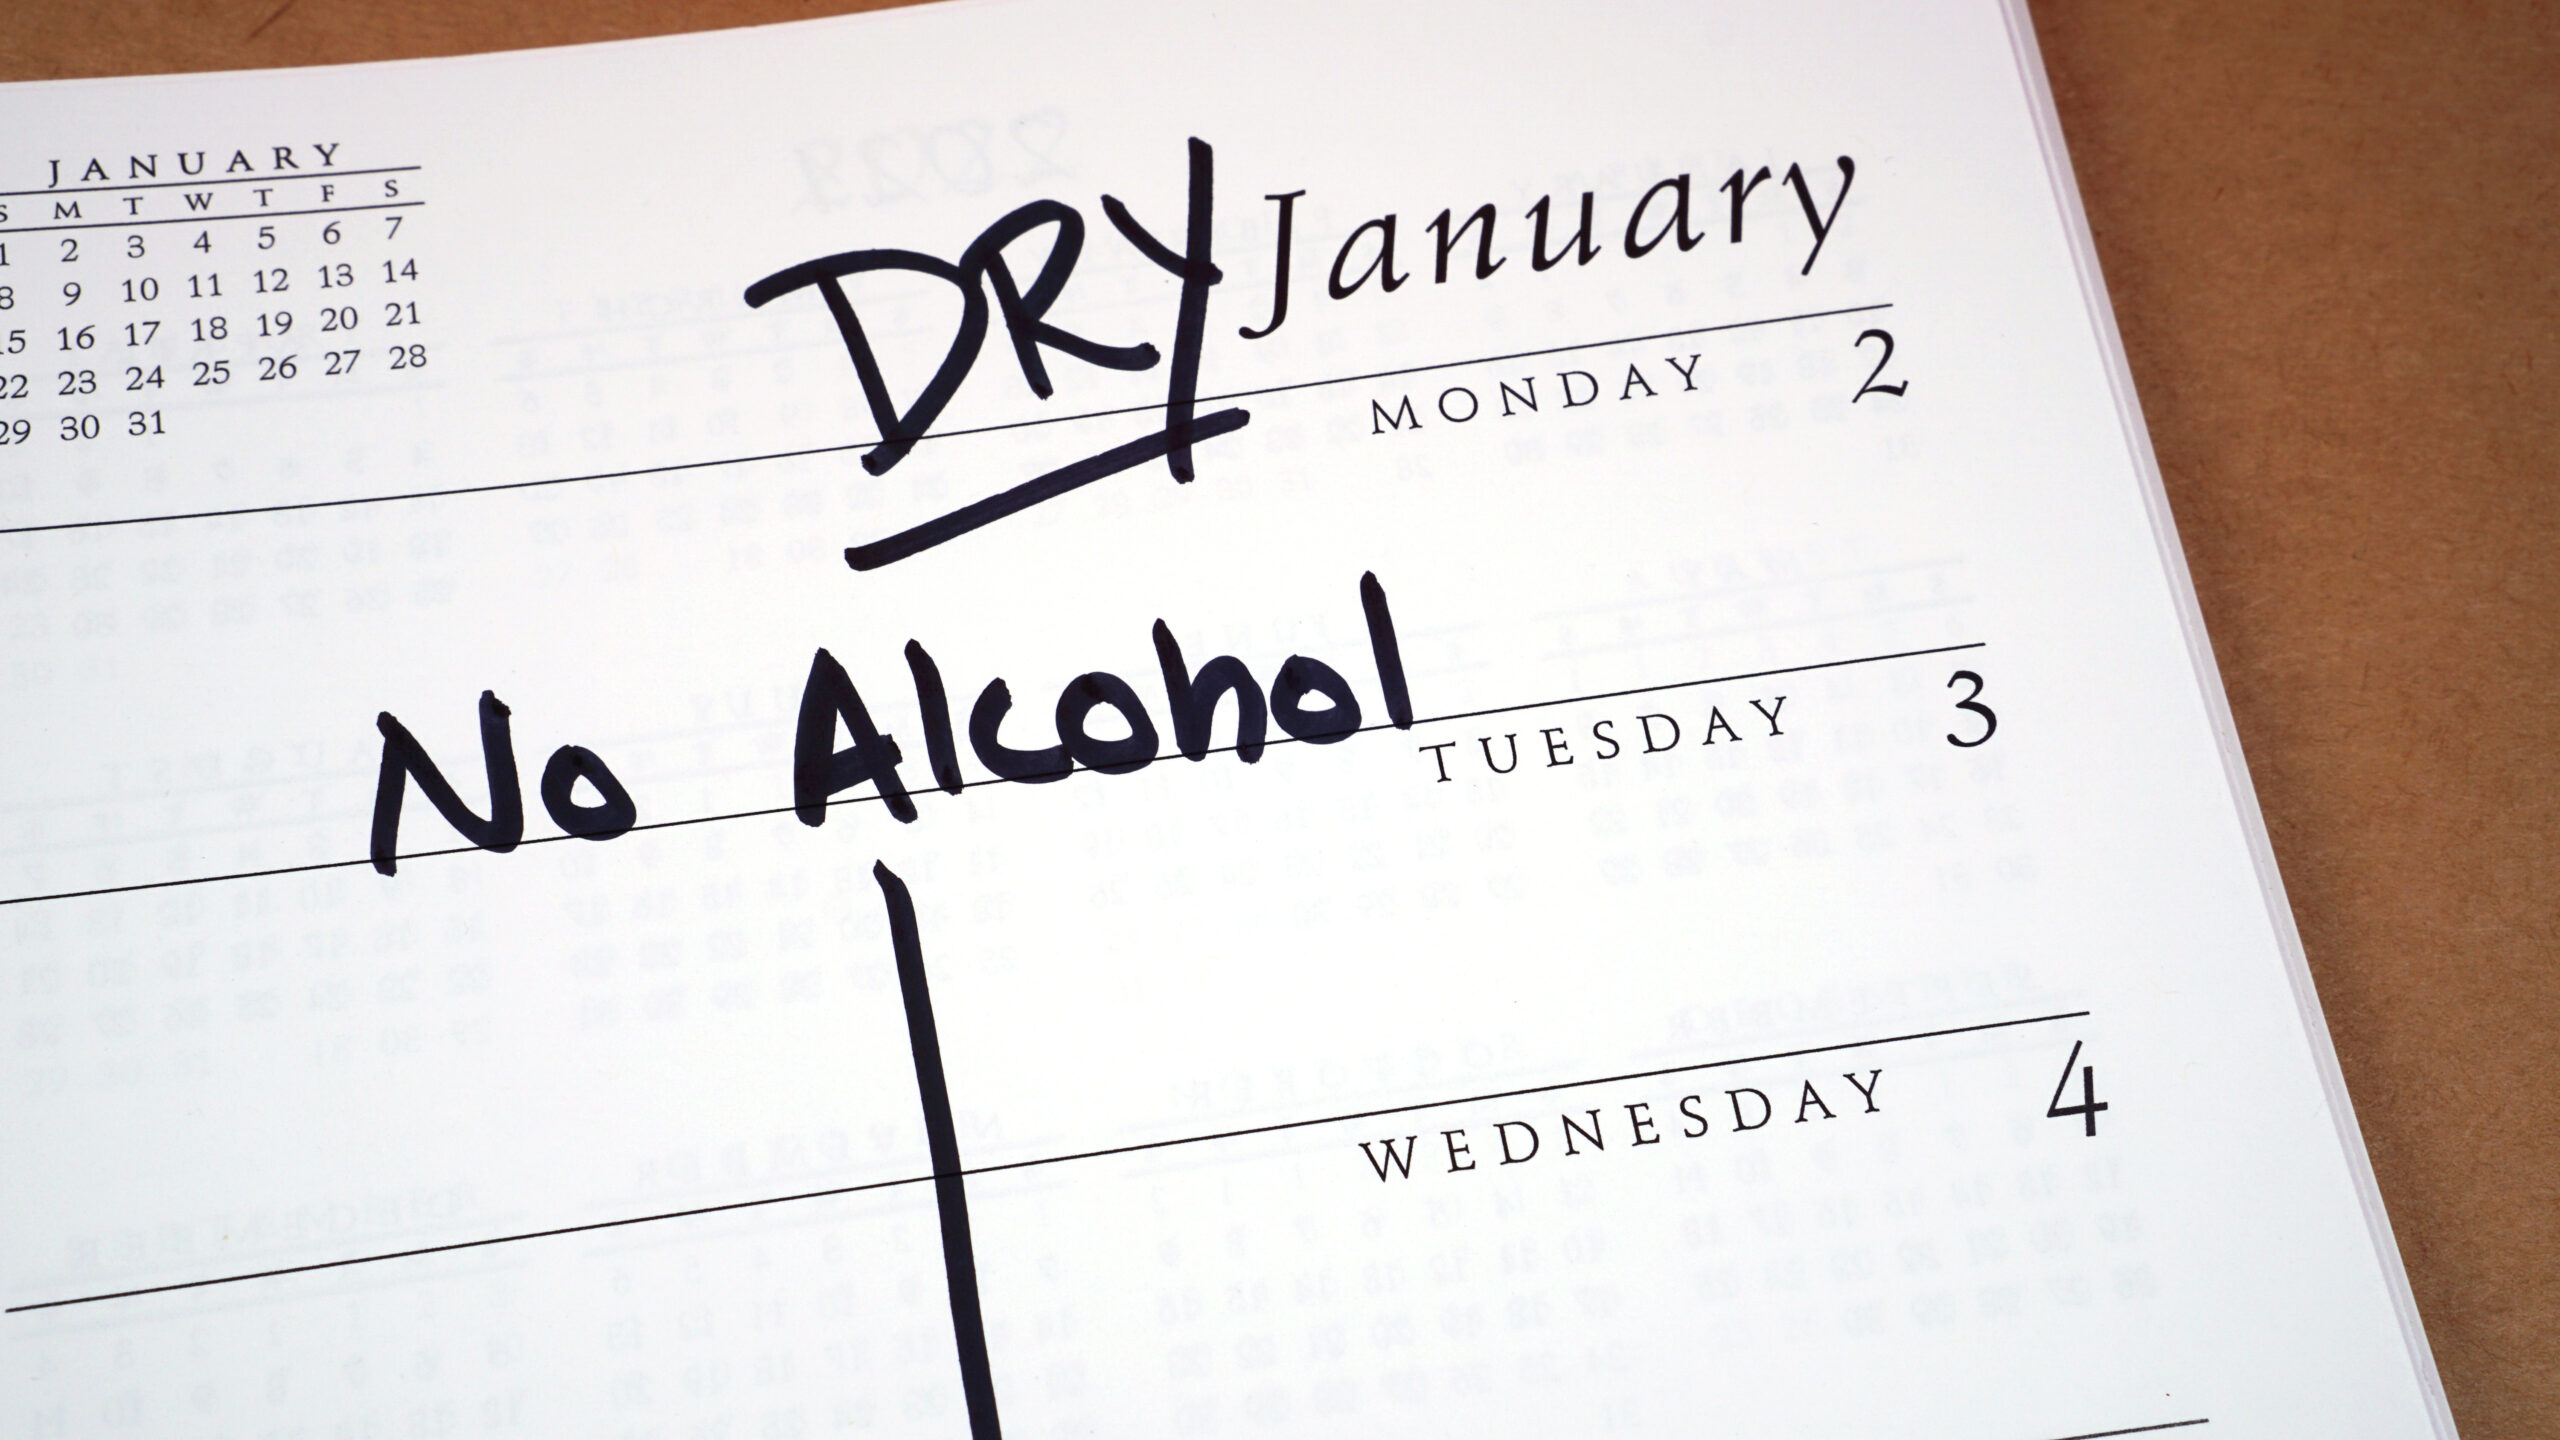 How Fetch Can Help You With Dry January